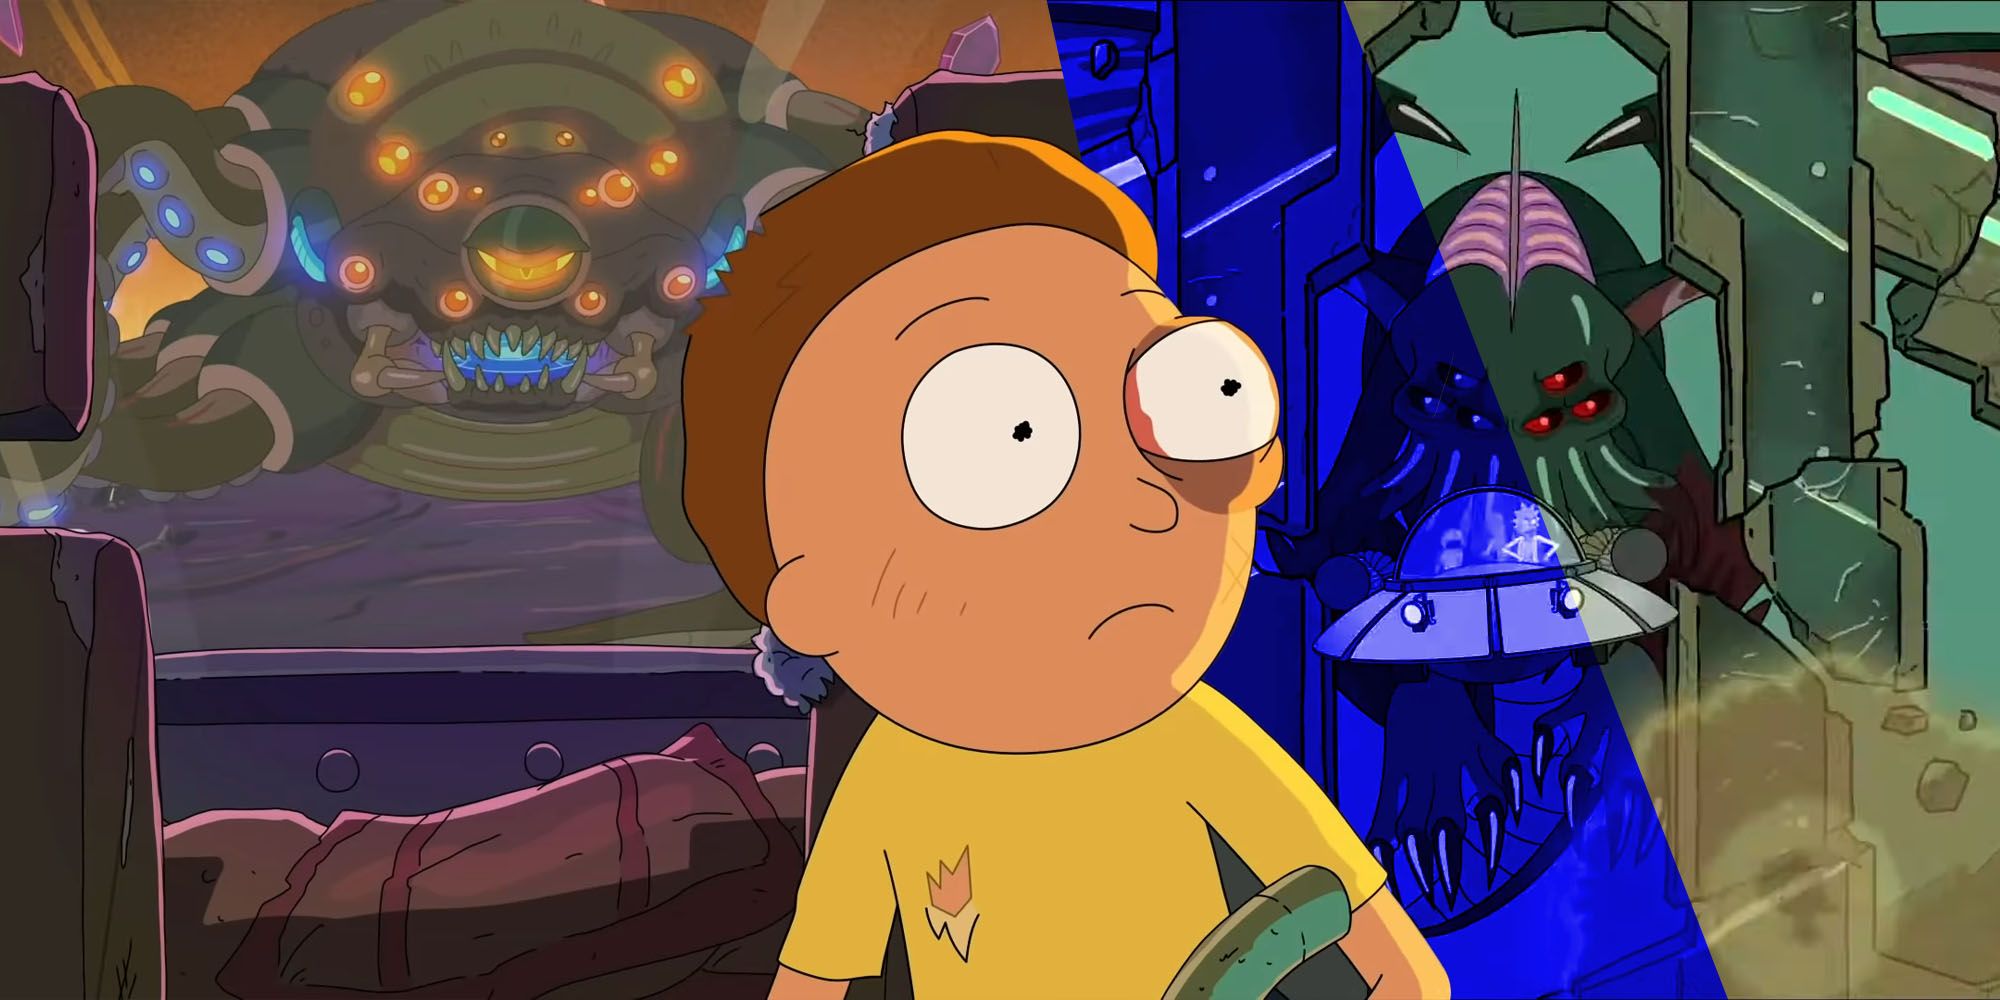 Rick and morty season 5 trailer teases Season 1 Promise Will Be Fulfilled